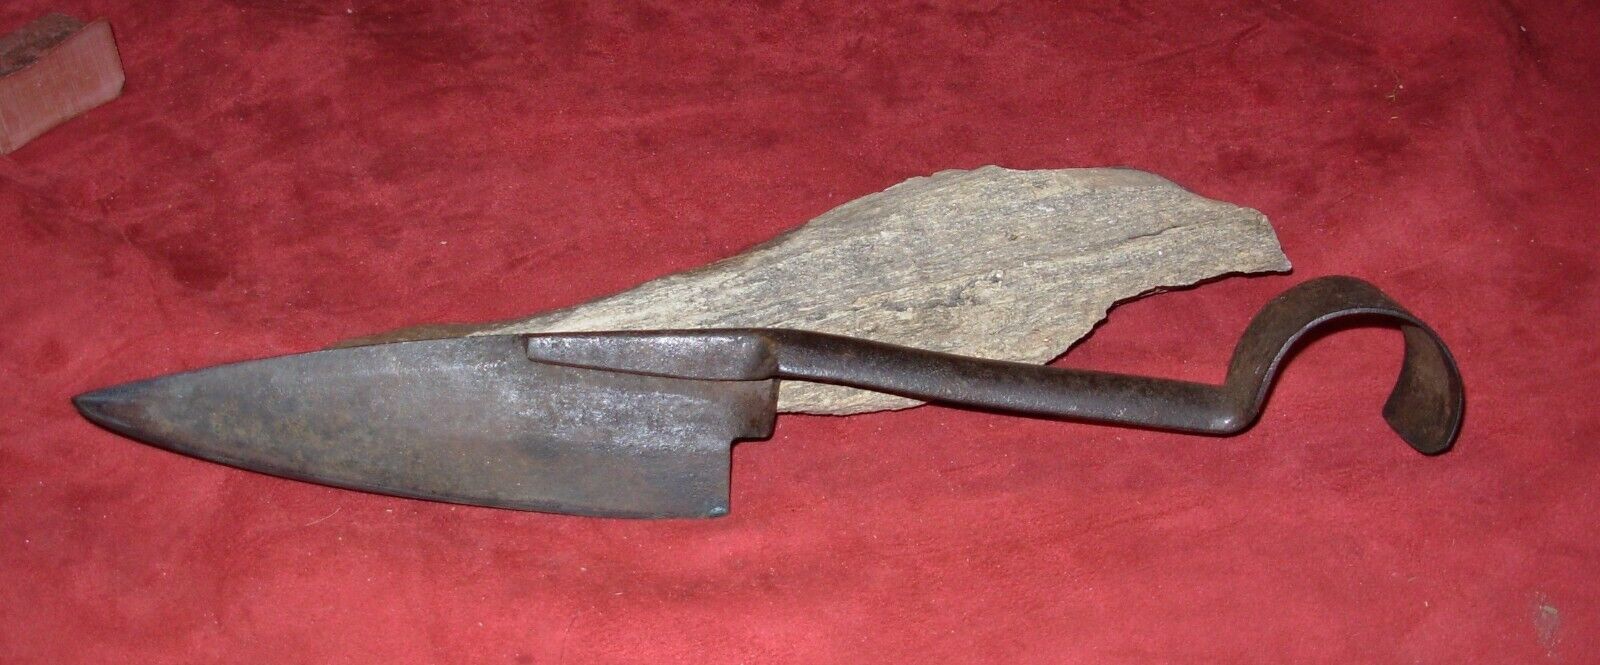 Antique Indian Knife Found North Dakota-Cut Sheep Shears Used By Sioux